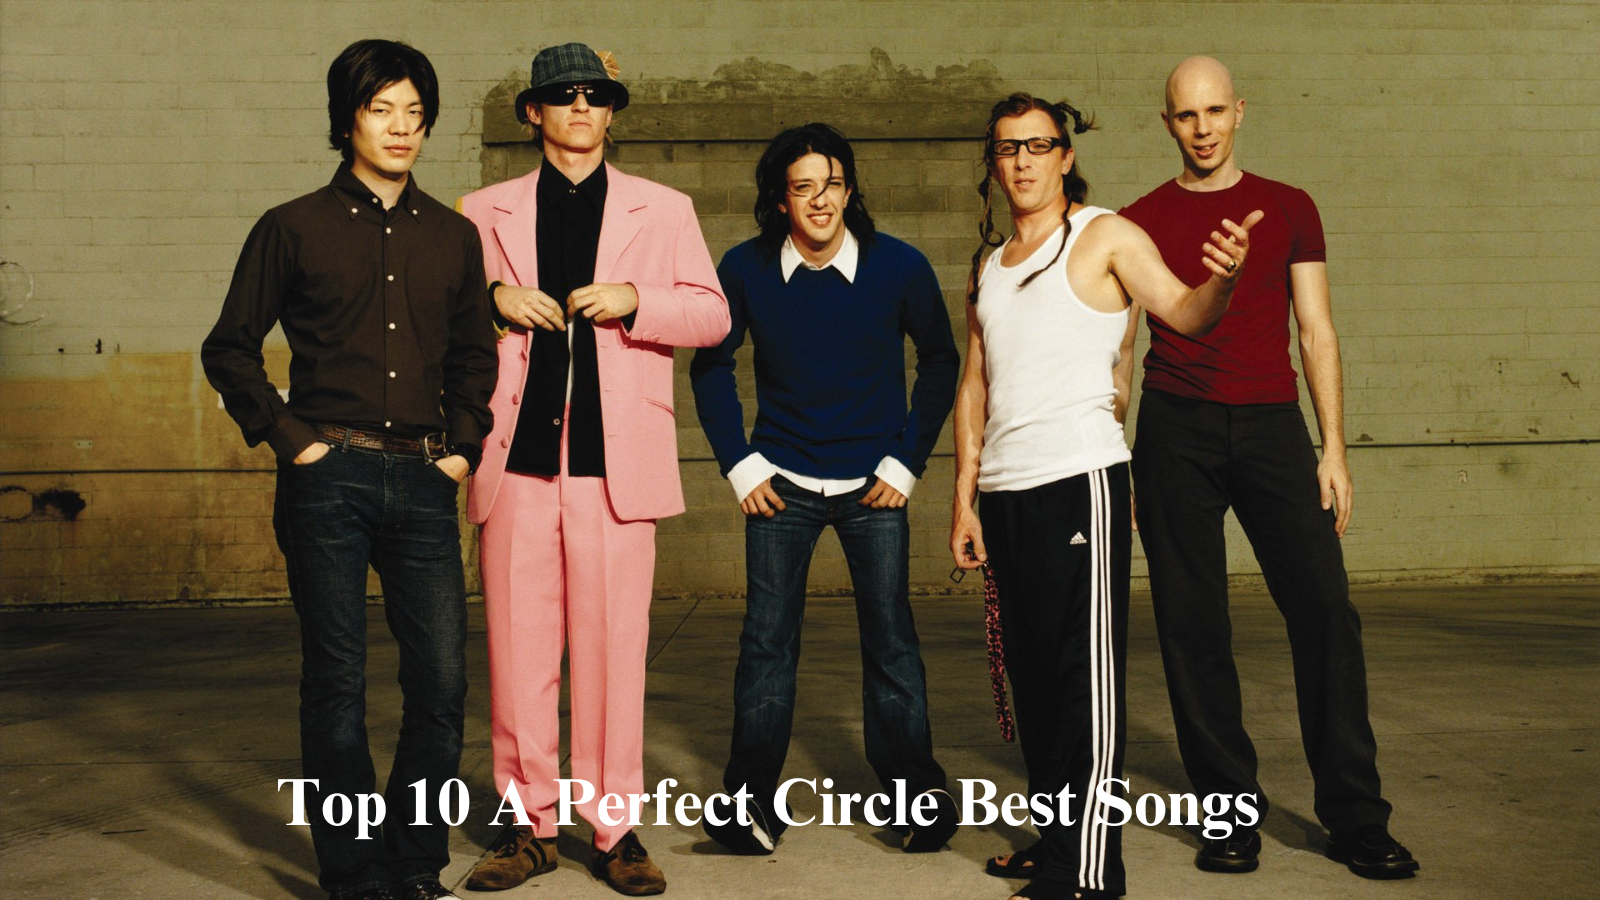 Top 10 A Perfect Circle Best Songs